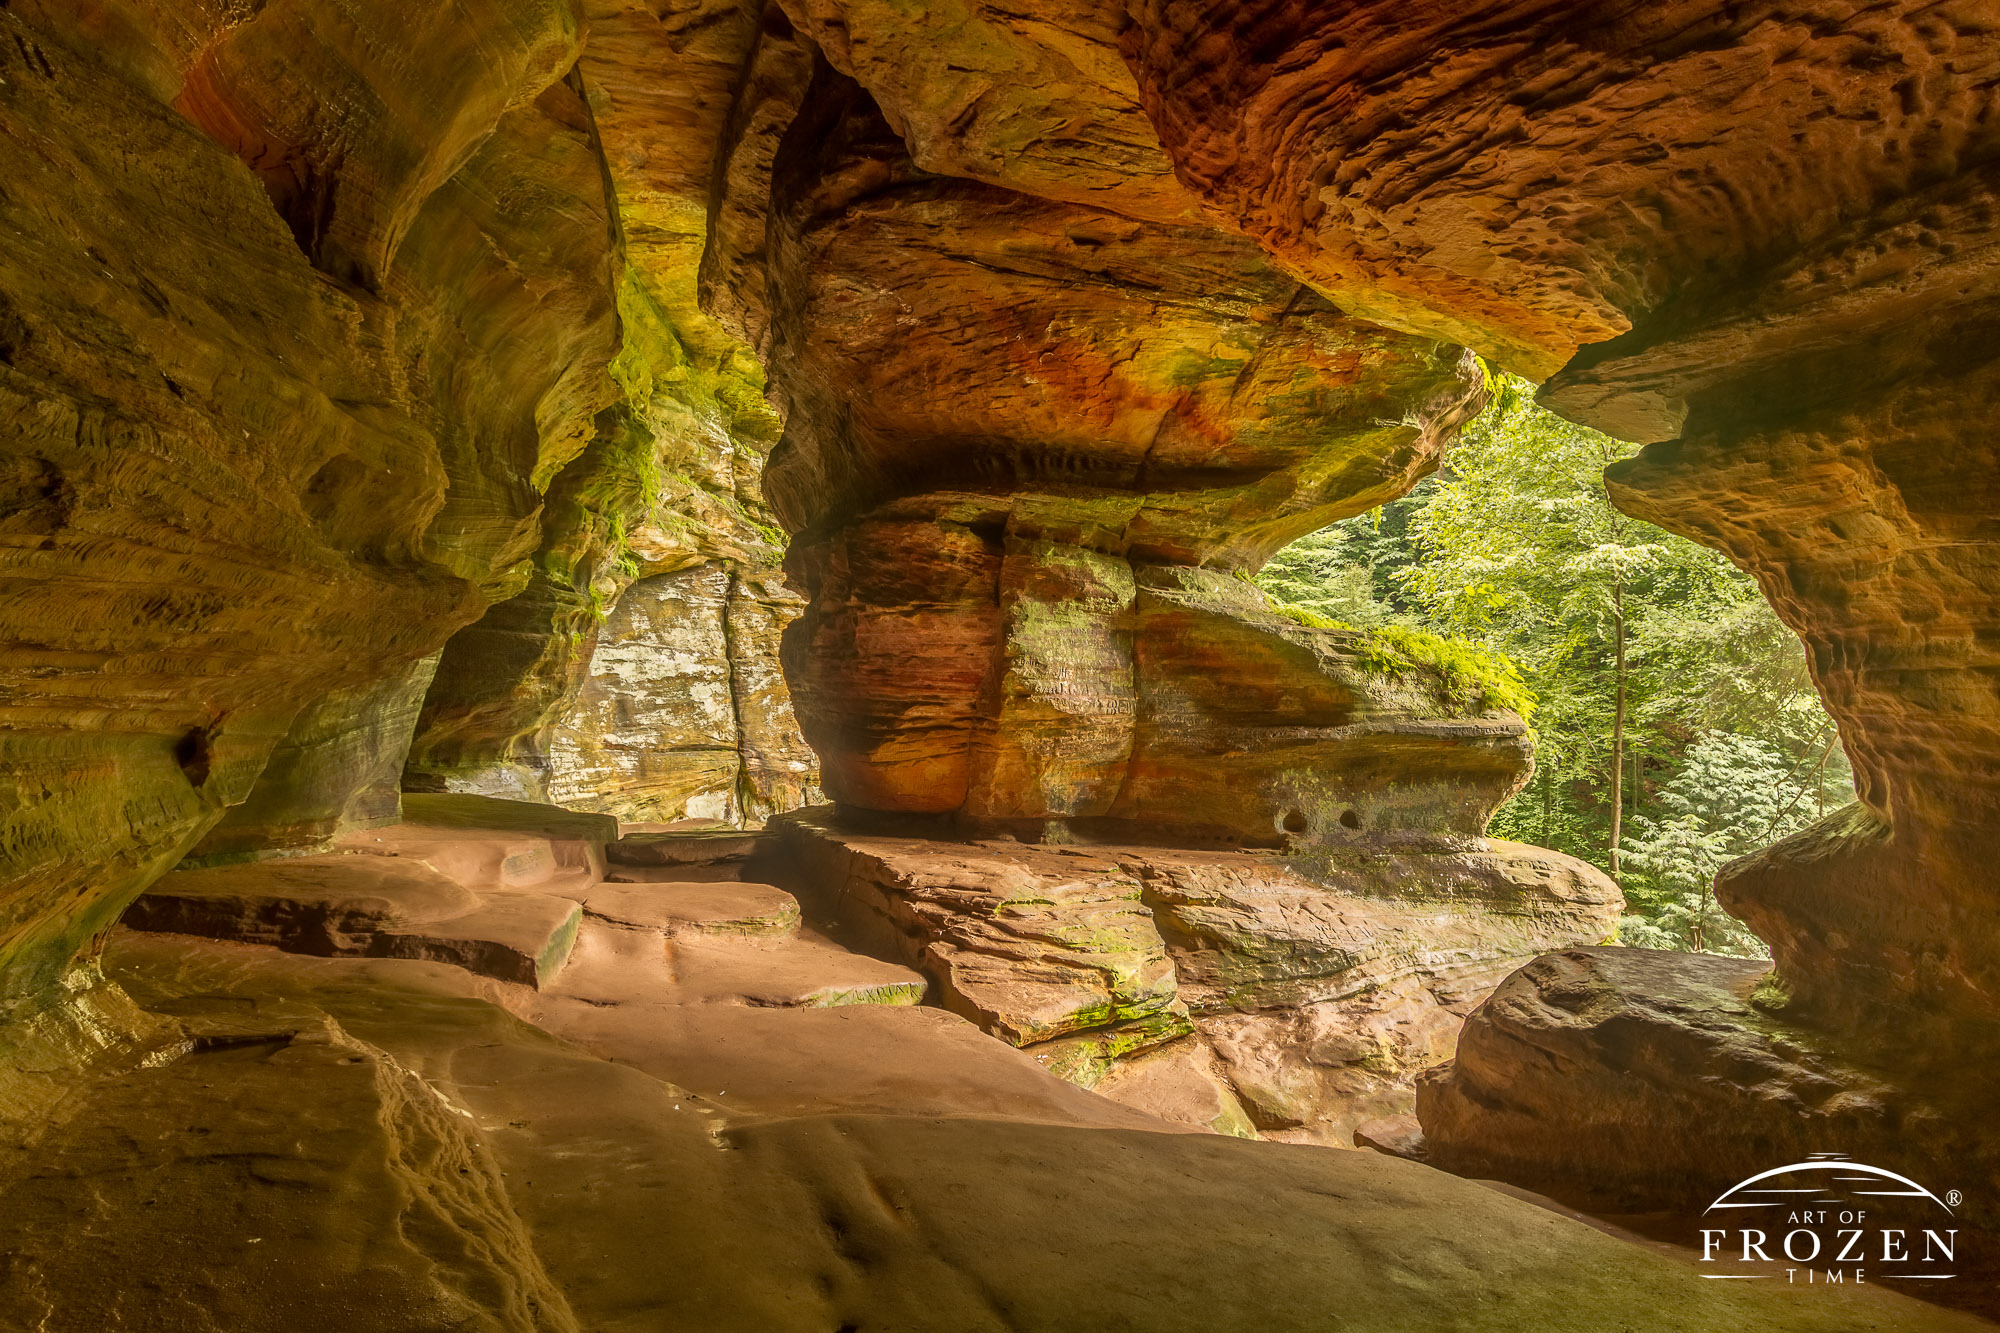 Interior panoramic view of the Rock House Cave showing various openings to the gorge below.